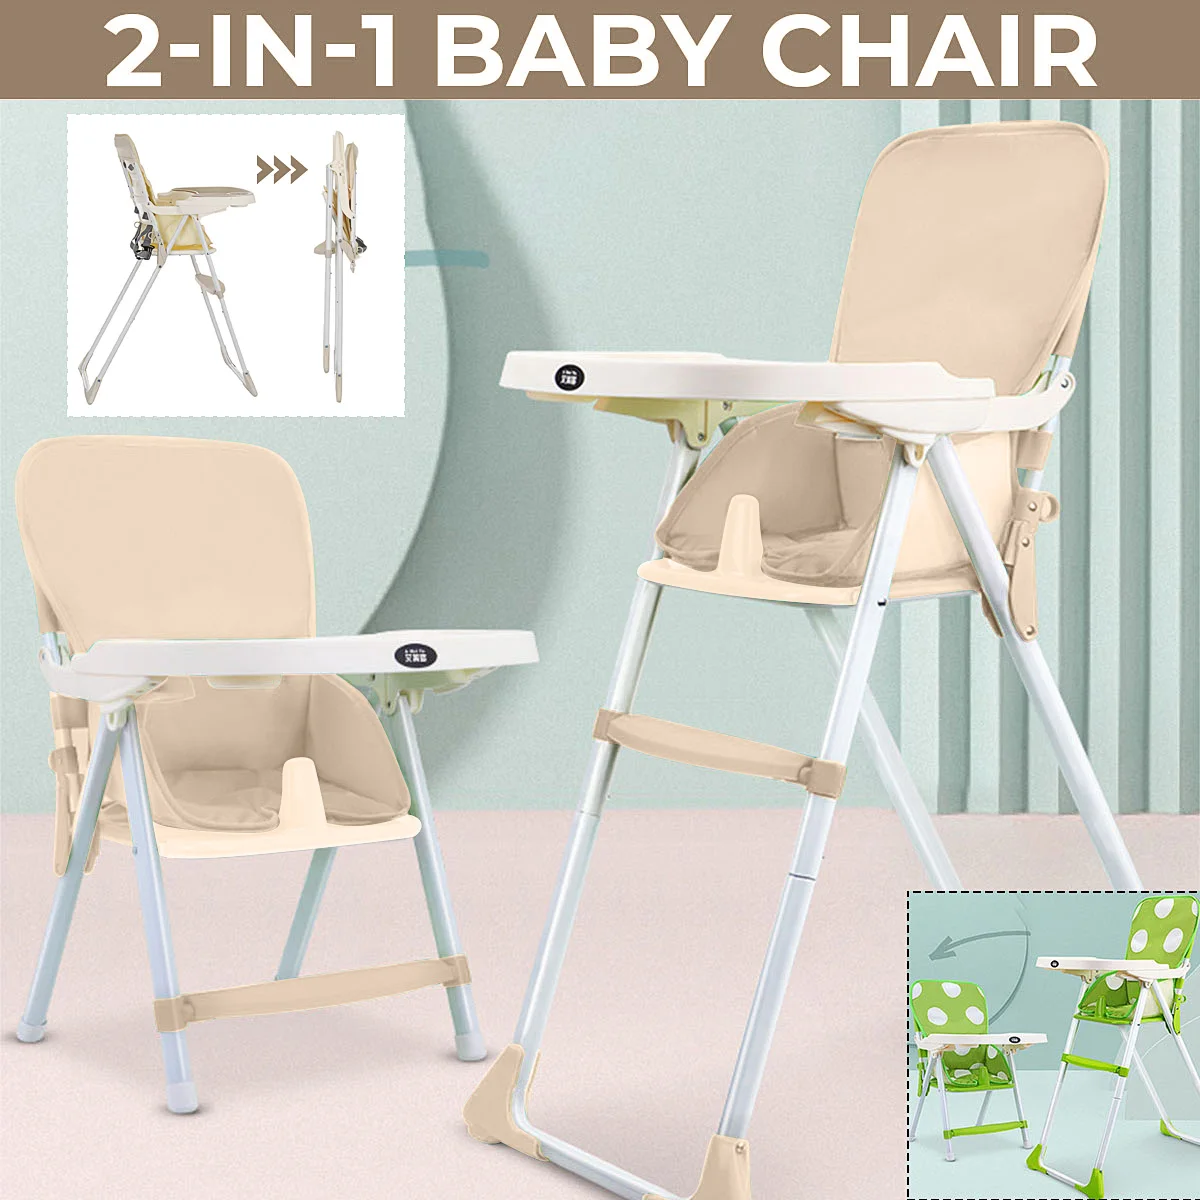 Baby High Chair with 3 Levels Adjustable Legs Portable Folding Tray Toddler Child Eat Feeding